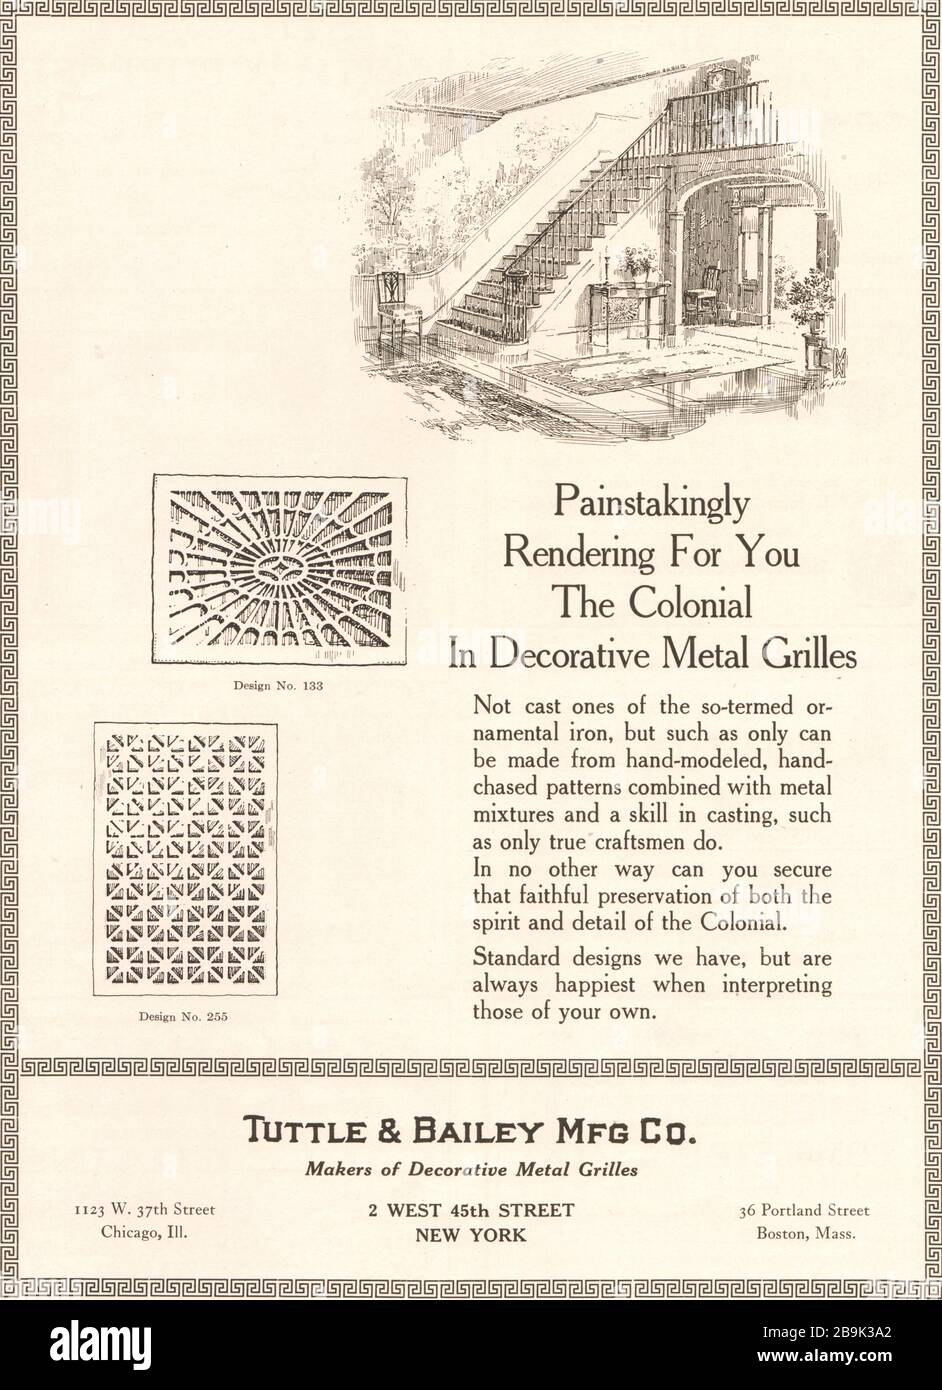 Painstakingly rendering for you, the colonail in decorative metal grilles. Tuttle & Bailey Manufacturing Co., 2 West 45th Street, New York (1922) Stock Photo